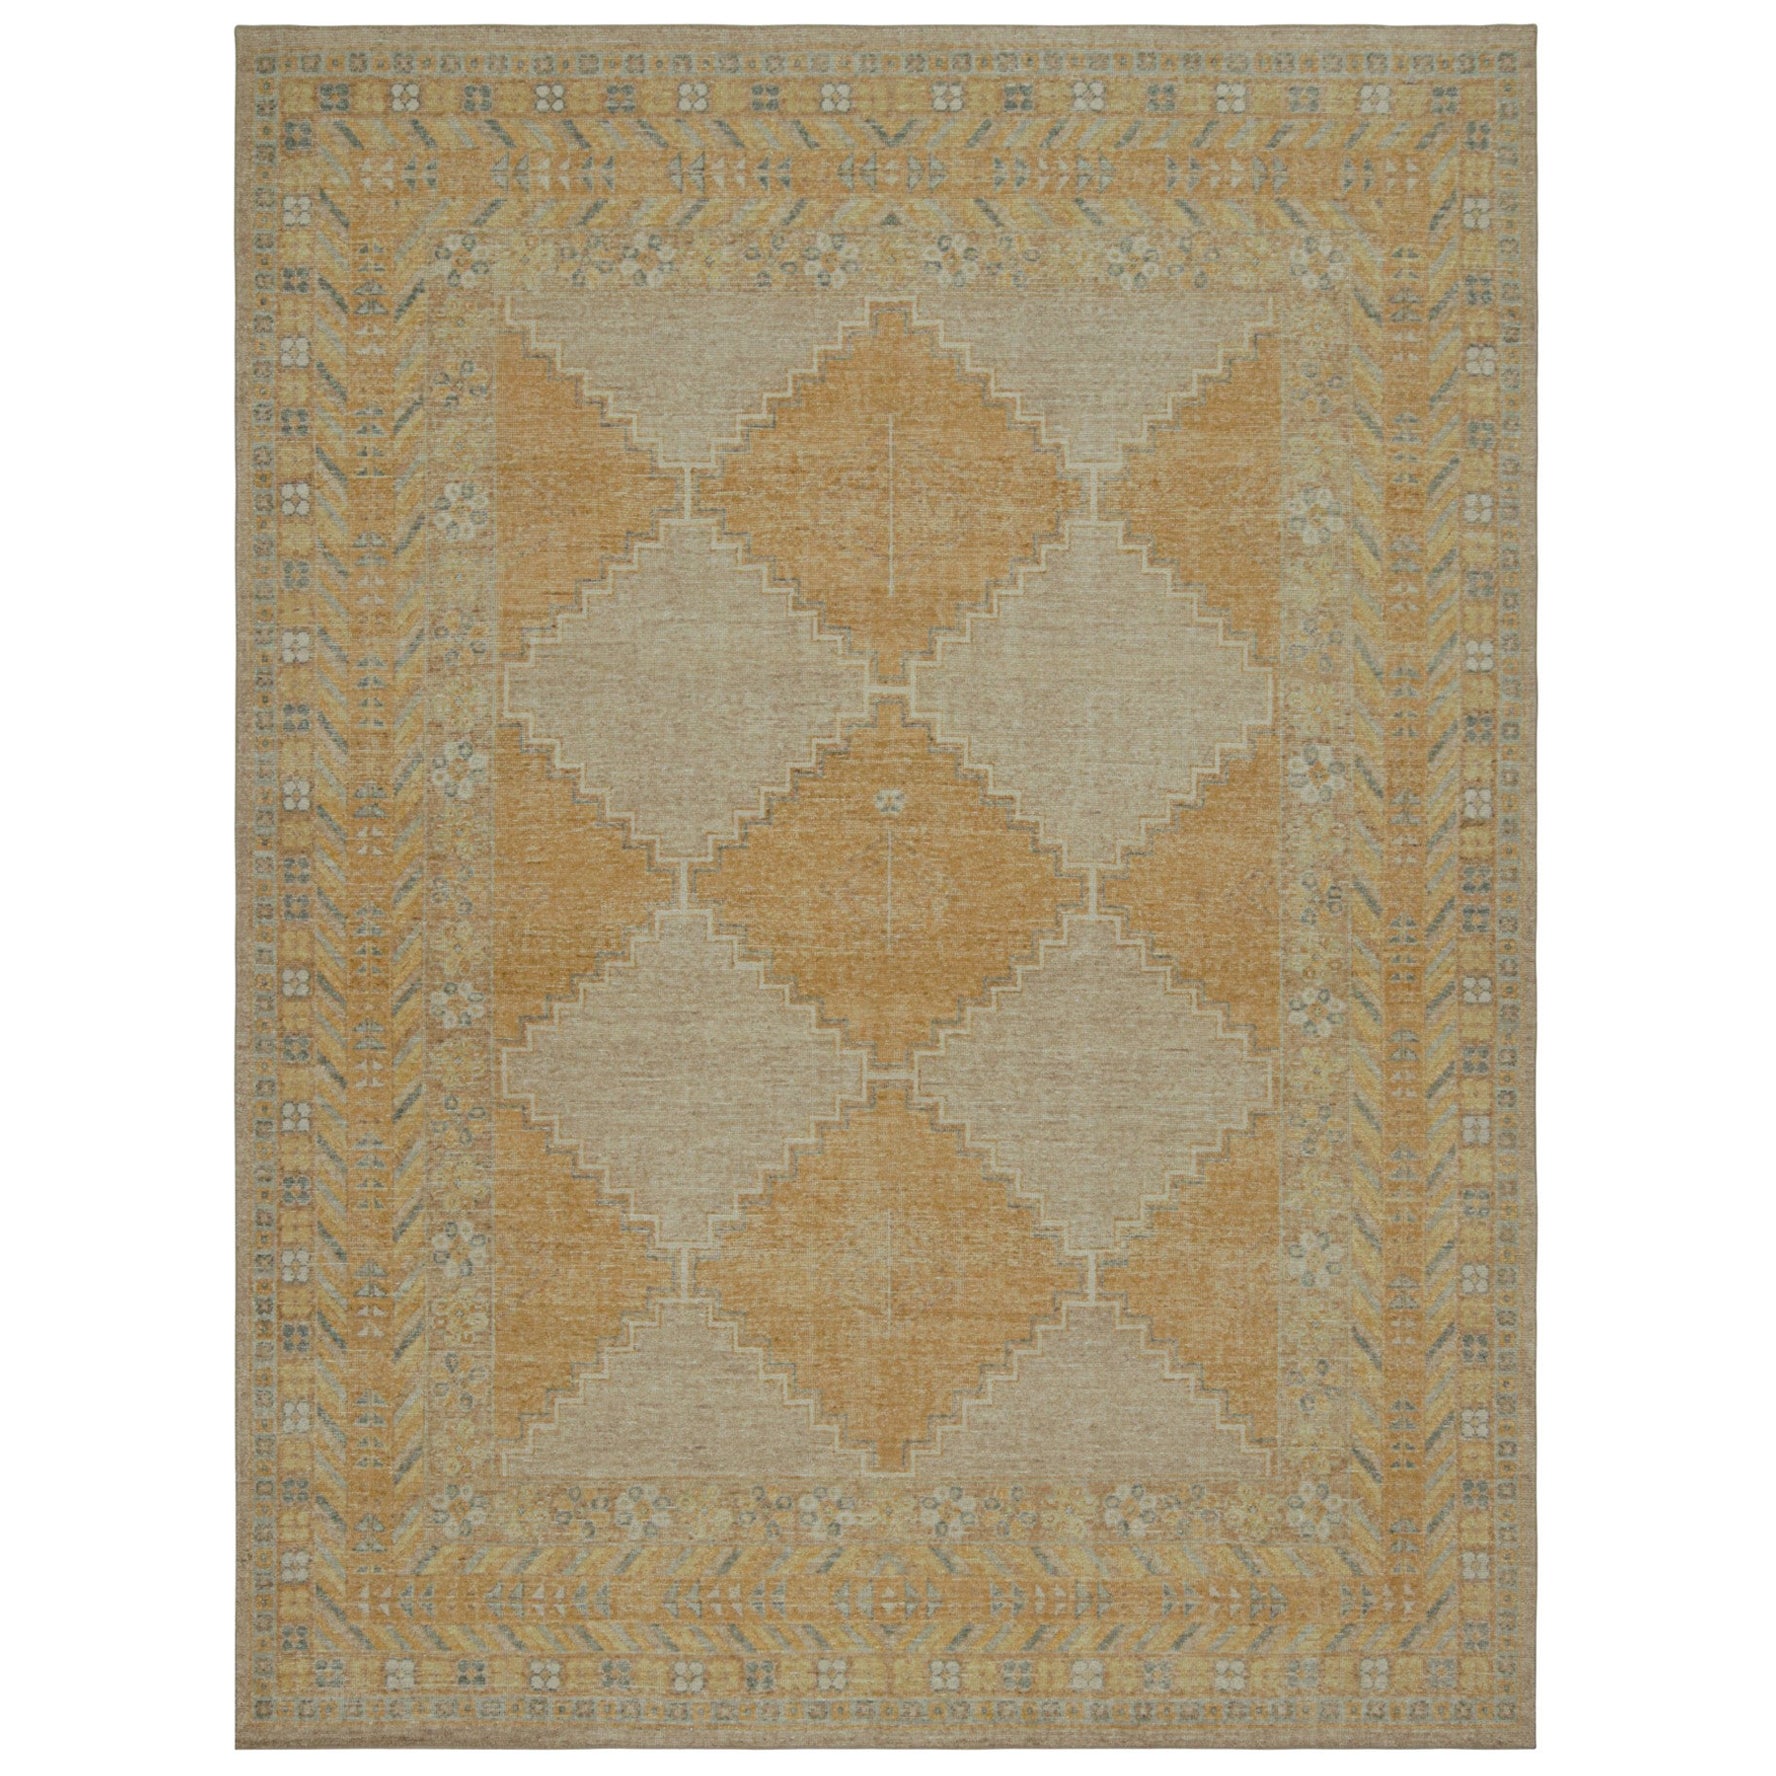 Rug & Kilim’s Modern Rug in Beige and Gold Tones, with Geometric Patterns